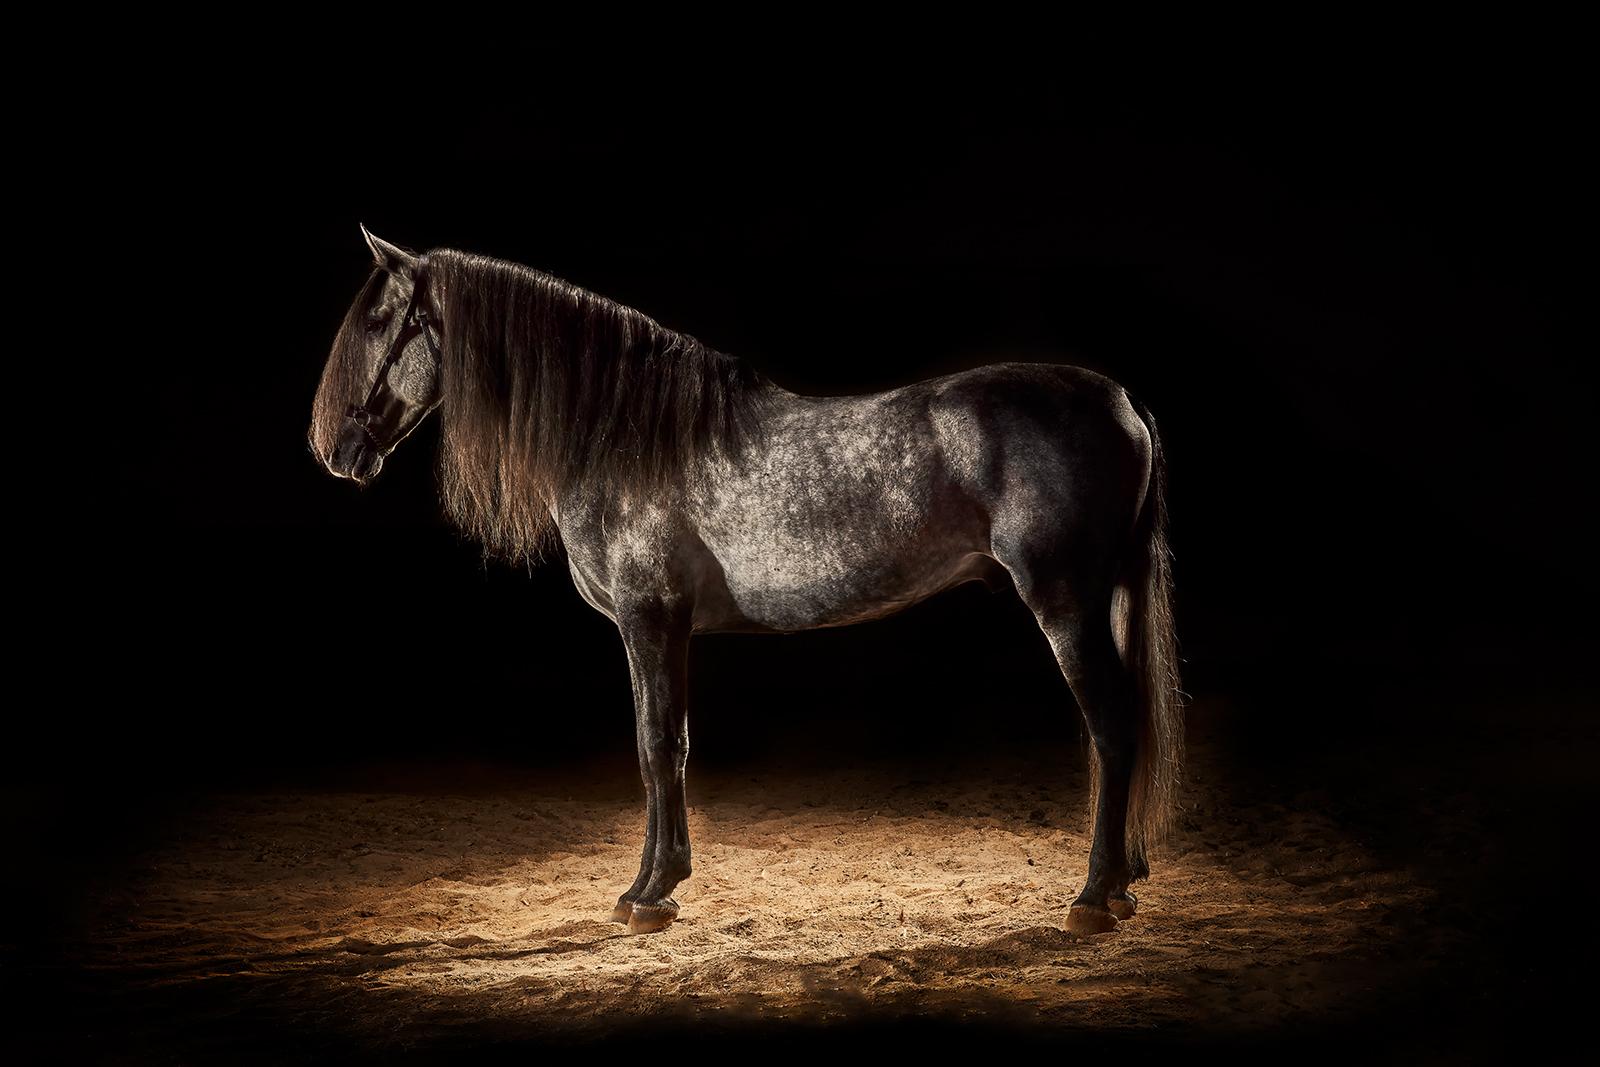 Horse 1  - Signed limited edition archival pigment print,  Edition of 5  

Horse photographed on location using studio lighting.

This is an Archival Pigment print on fiber based paper ( Hahnemühle Photo Rag® Baryta 315 gsm , Acid-free and